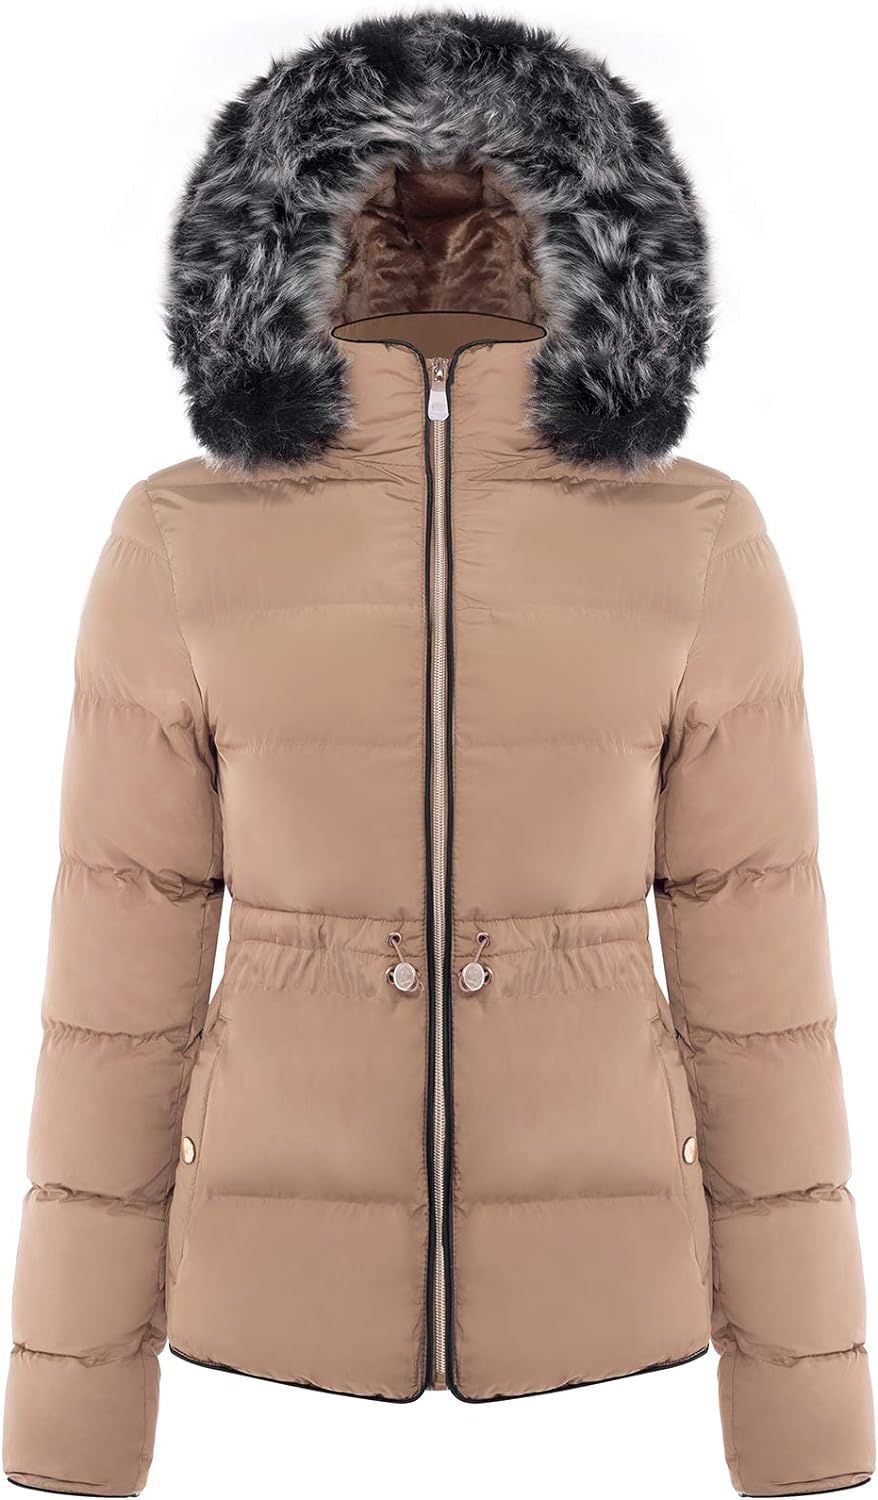 BodiLove Women's Winter Quilted Puffer Short Coat Jacket with Removable Faux Fur Hood and Zipper | Amazon (US)